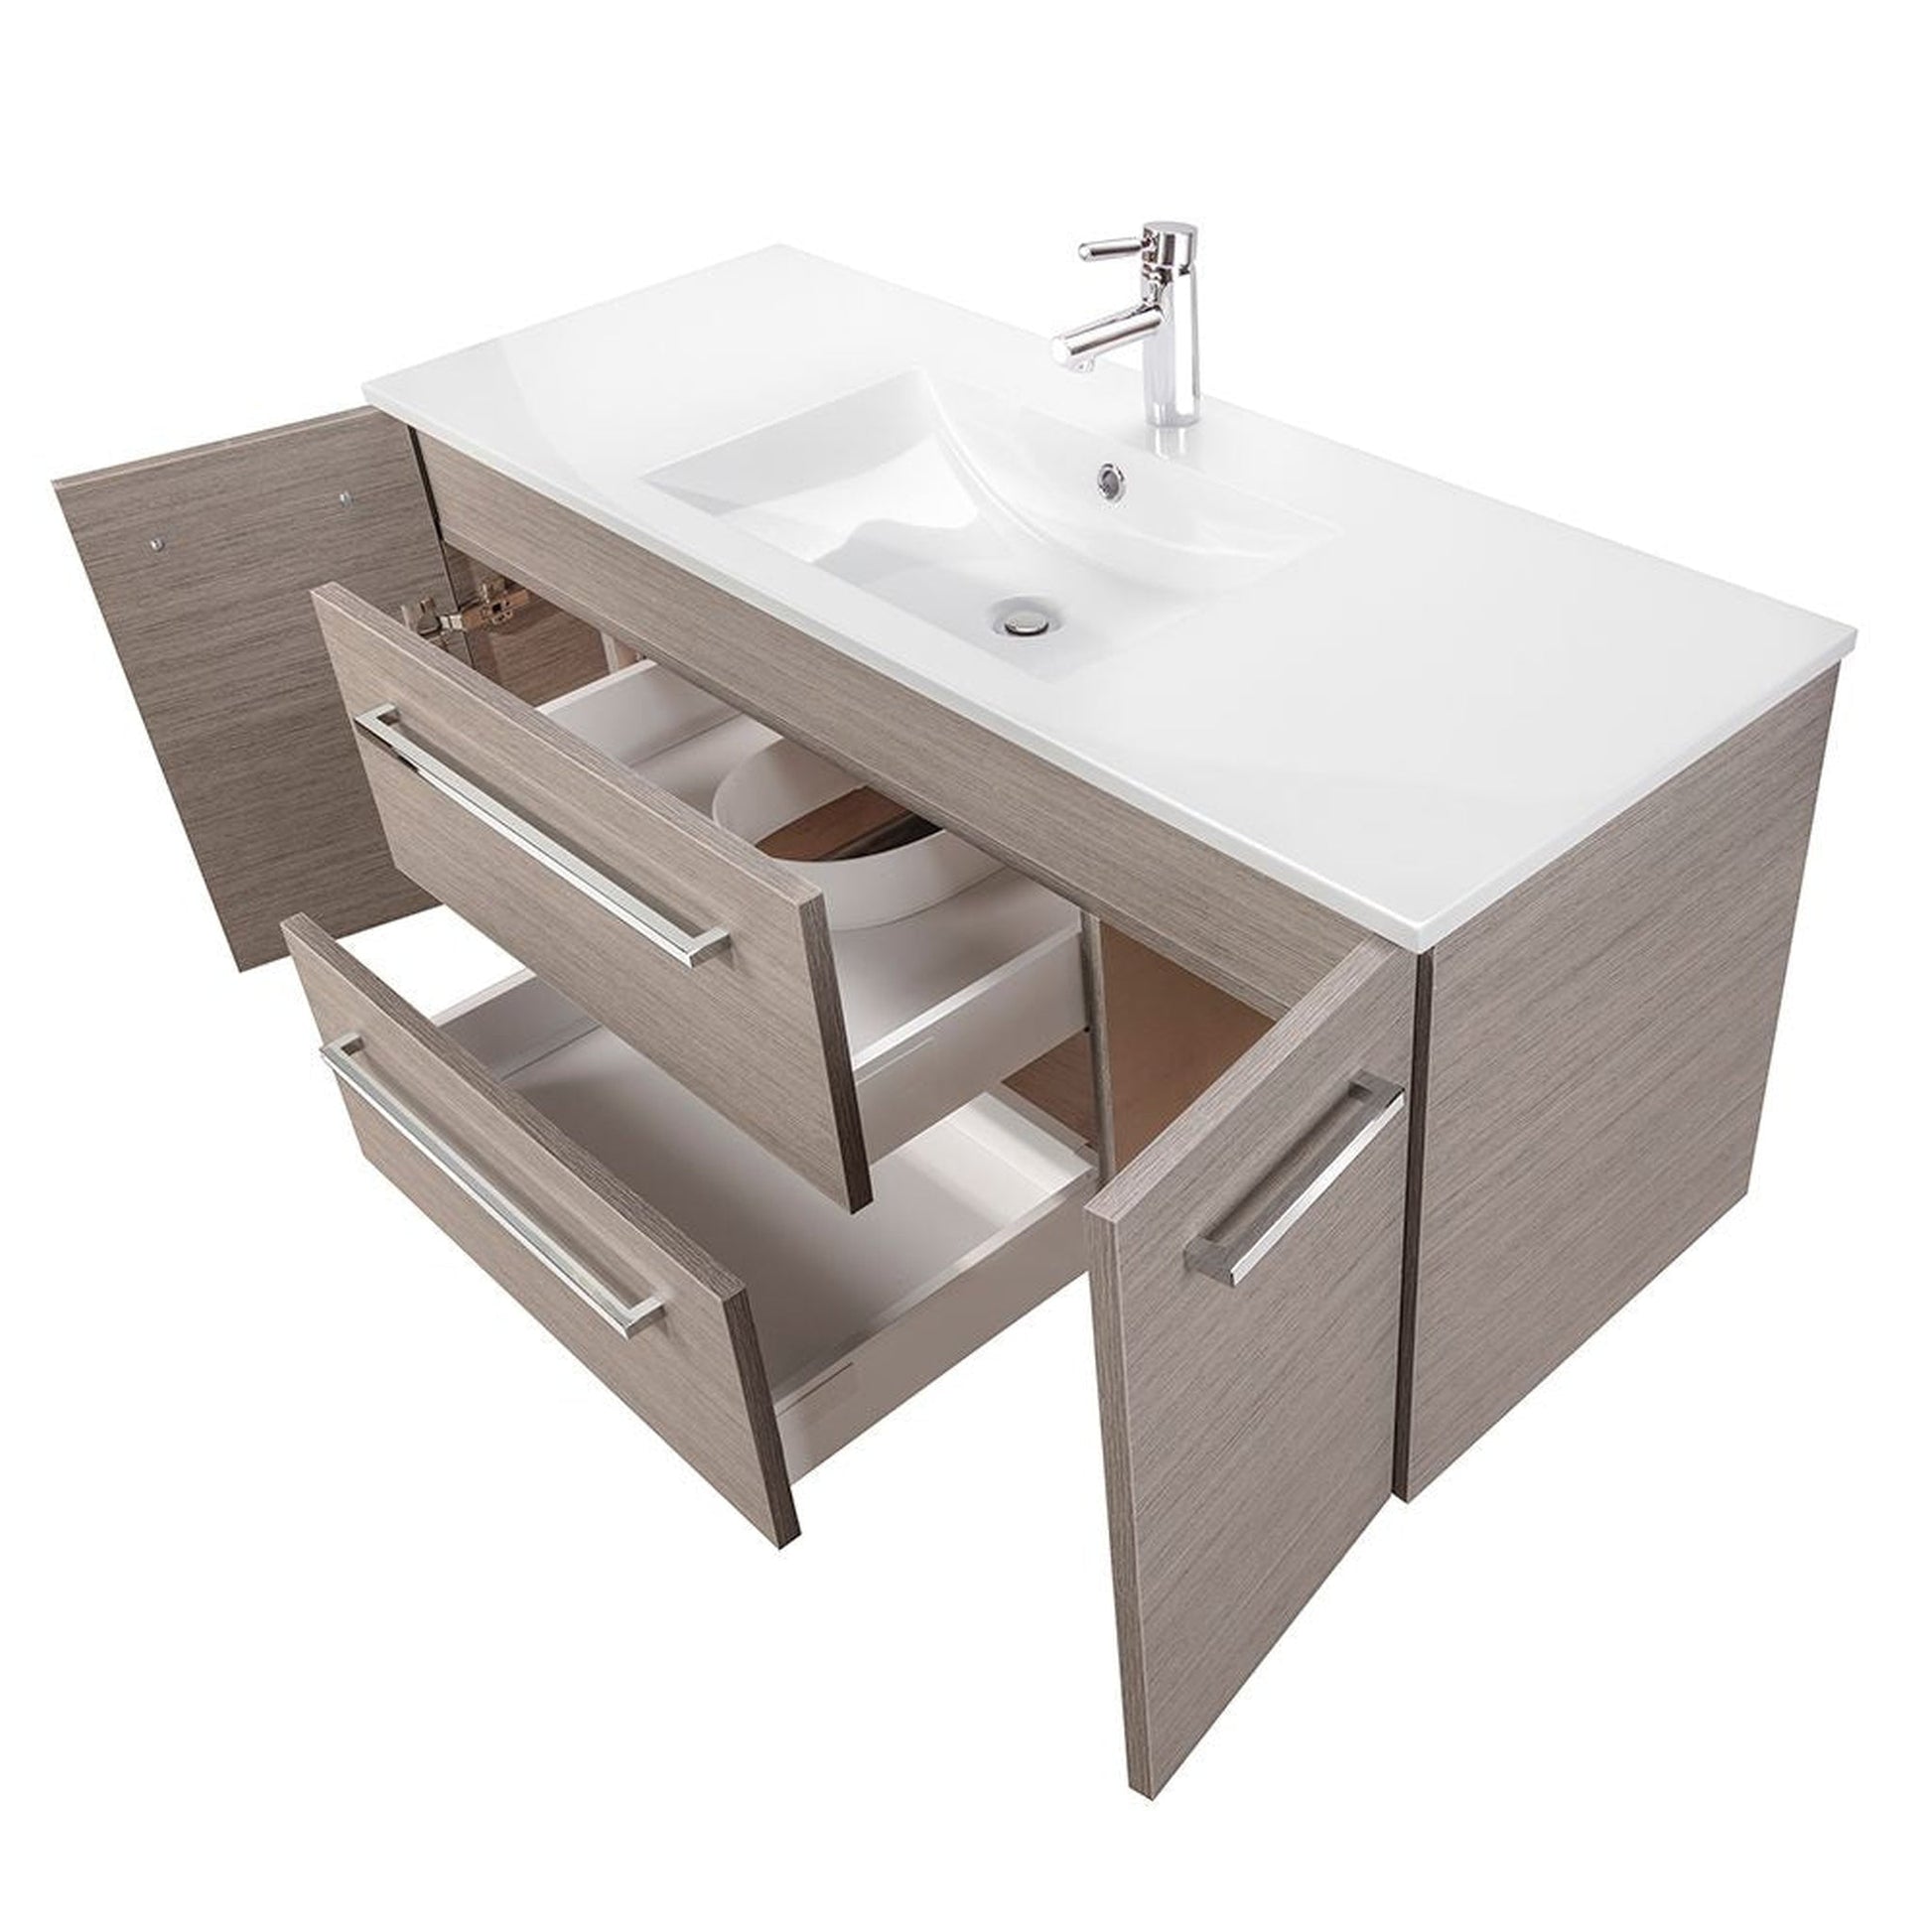 Abby Bath Aiden 48” x 20” Wall-Mounted Vanity in Slate Finish With Two Drawers and Chrome Handles